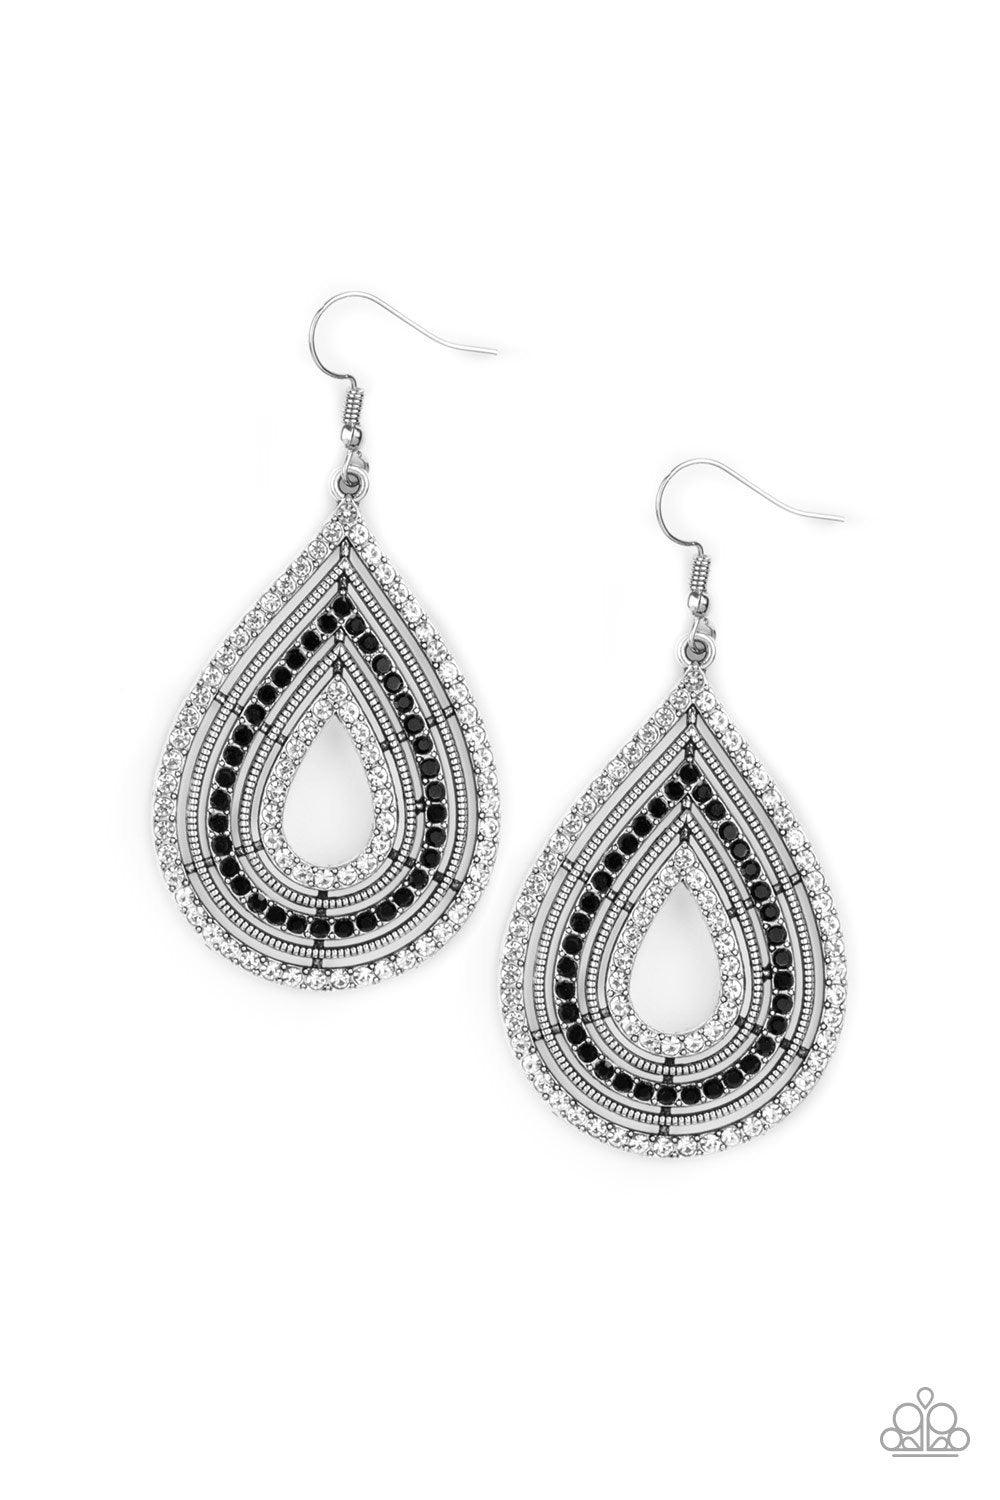 Paparazzi Accessories 5th Avenue Attraction - Black White and black rhinestones encrusted frames and textured silver frames alternate into a dramatic teardrop for a refined flair. Earring attaches to a standard fishhook fitting. Jewelry